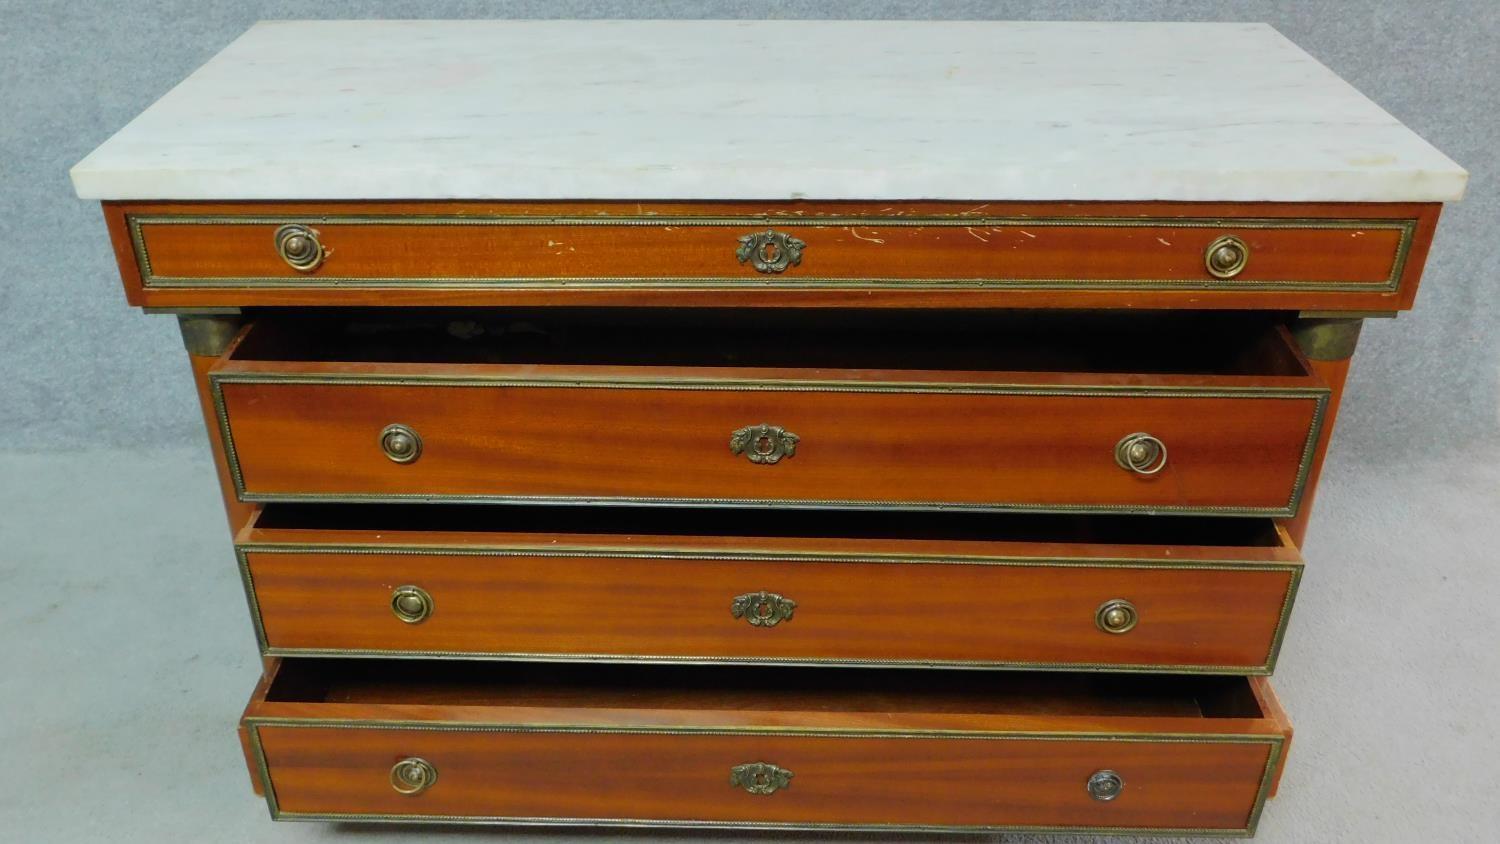 A Georgian style mahogany empire dresser with white marble top, decorative pillars to the sides - Image 3 of 5